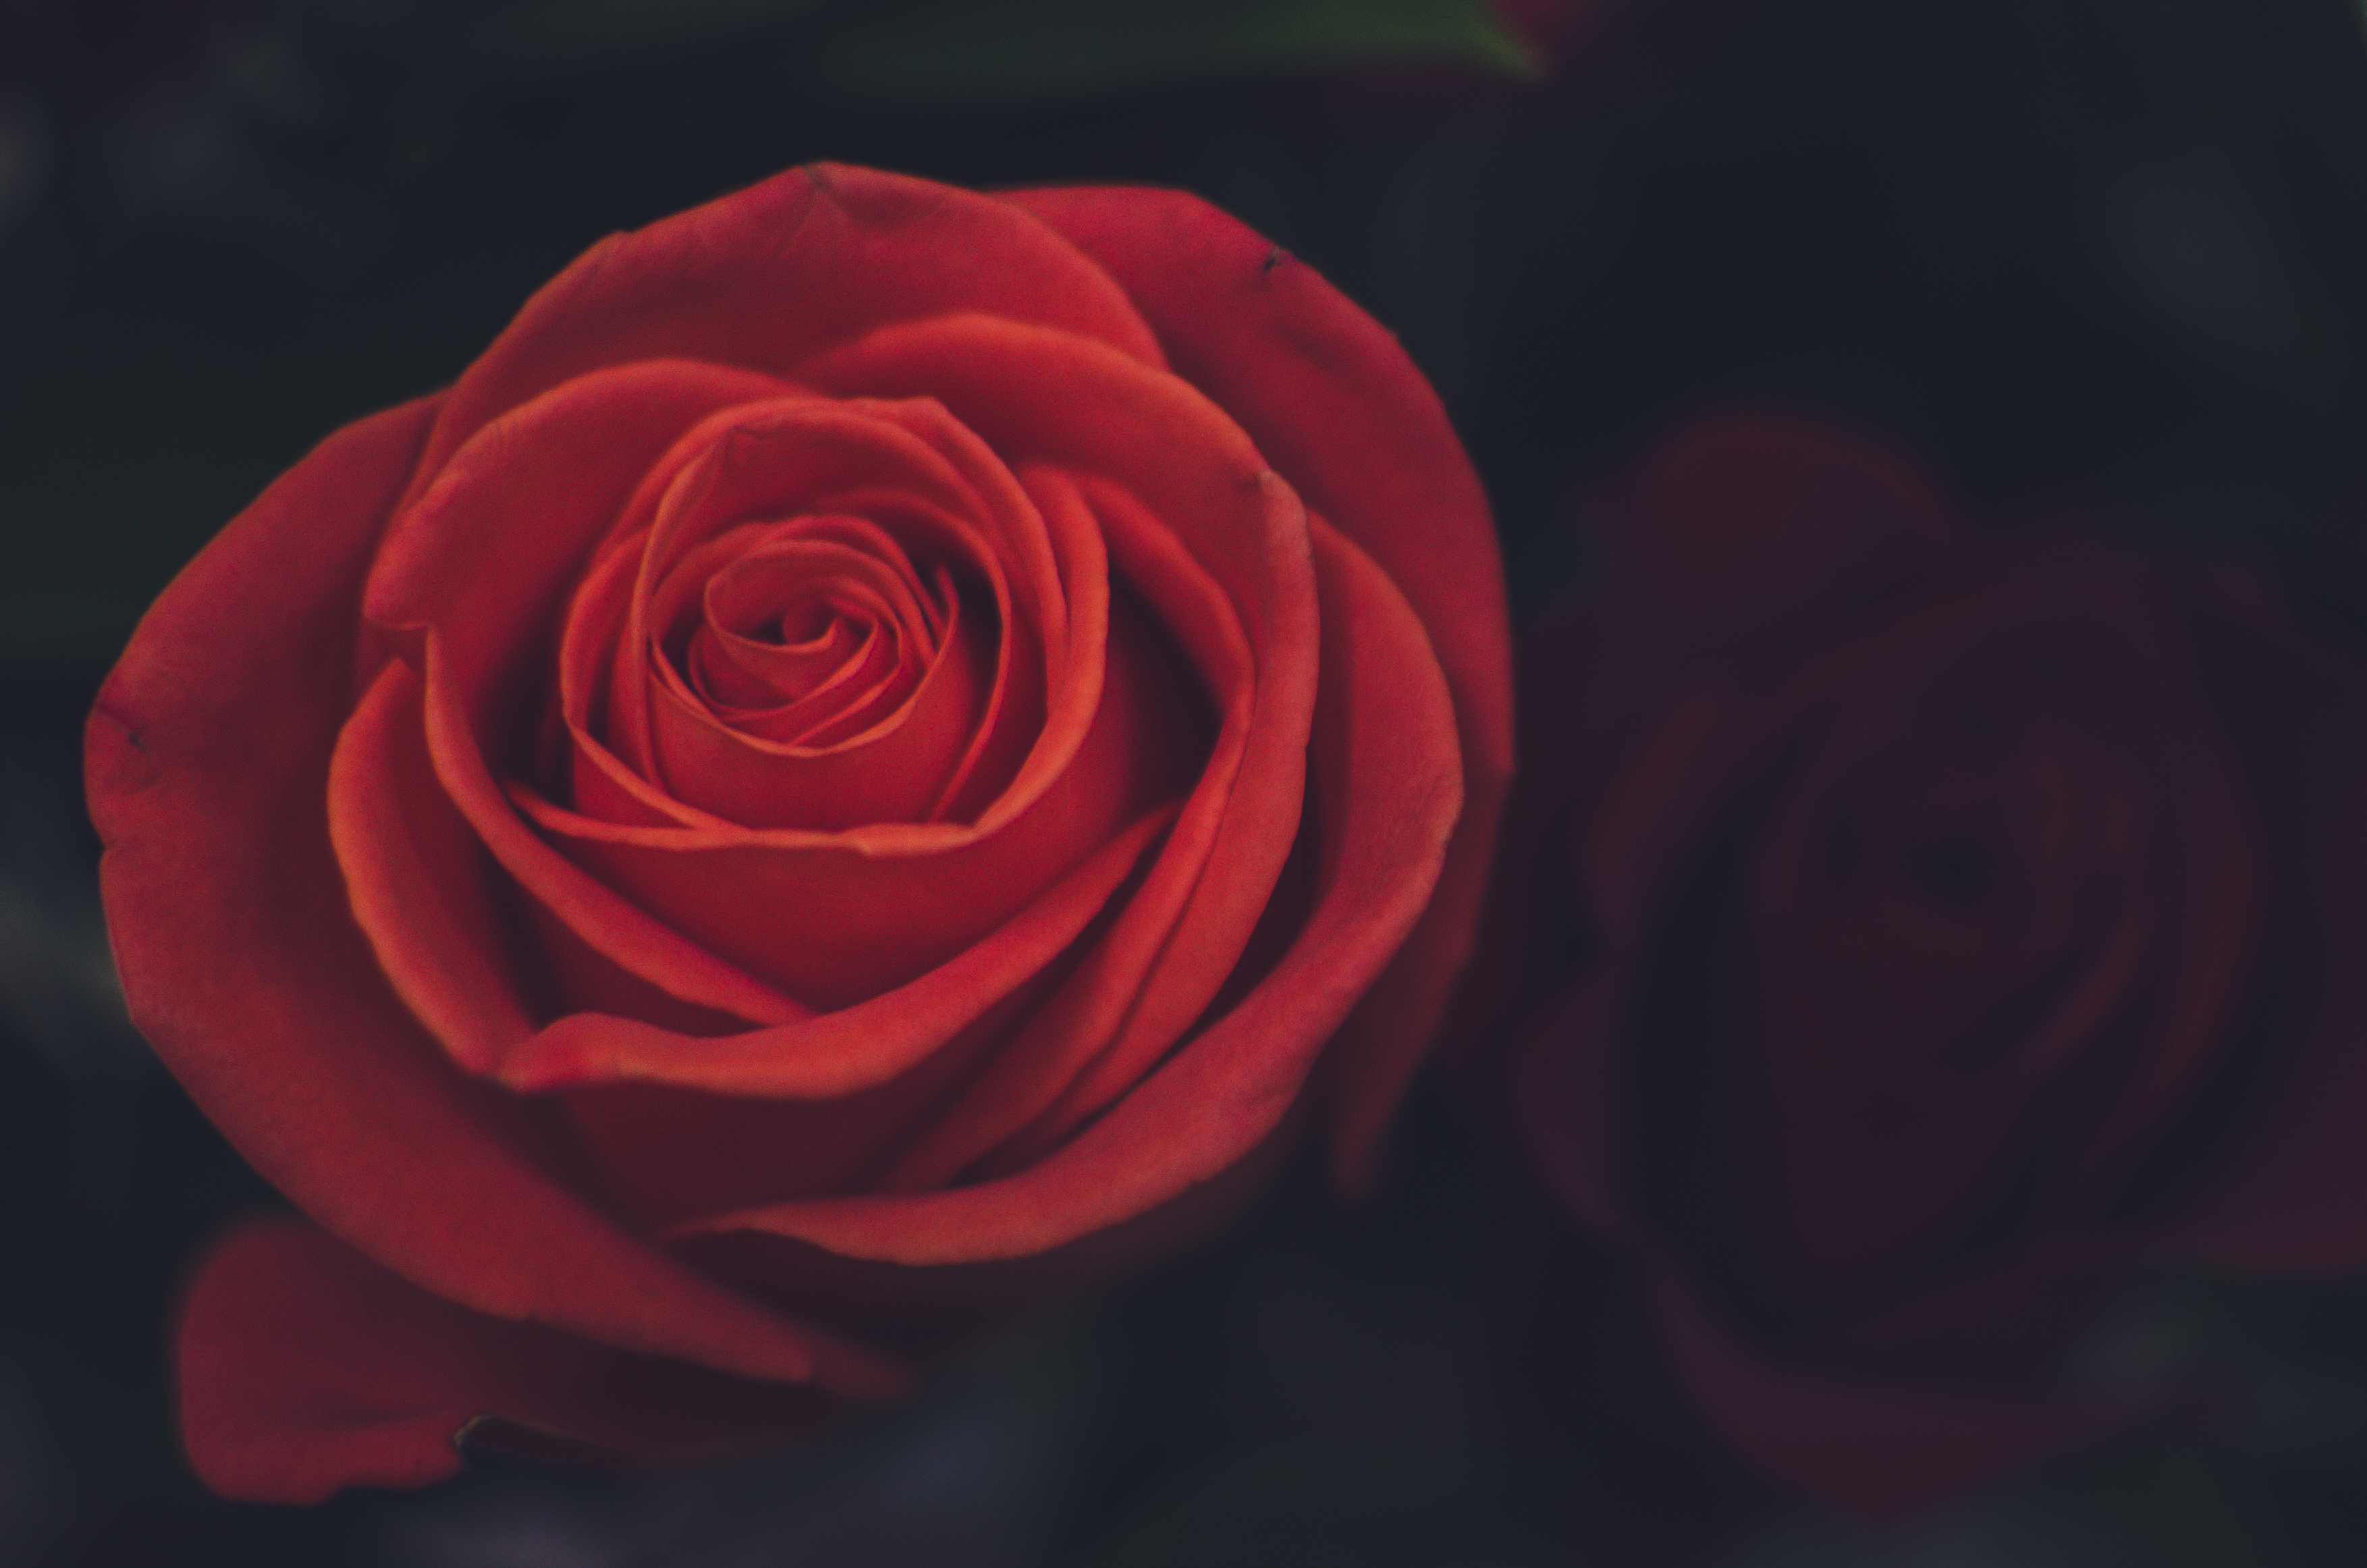 117632 download wallpaper rose flower, flowers, red, rose, petals, bud screensavers and pictures for free